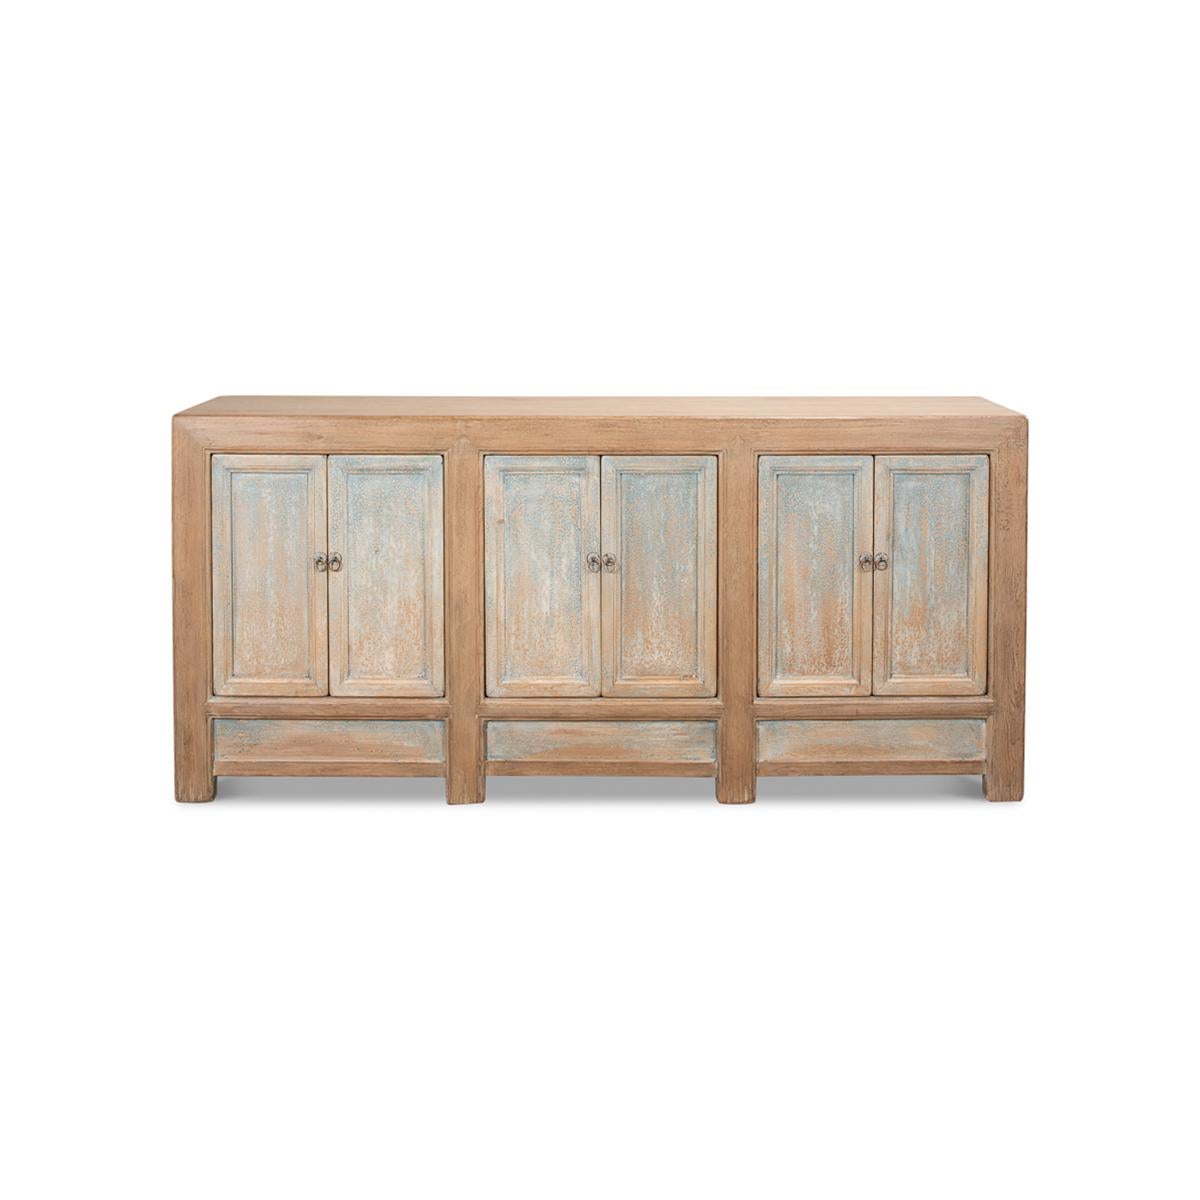 Made with pine with a distressed rustic blue finish and a vintage look. Six cabinet doors with simple lines with simple hardware. The interior is fitted with removable shelves.

Dimensions: 78